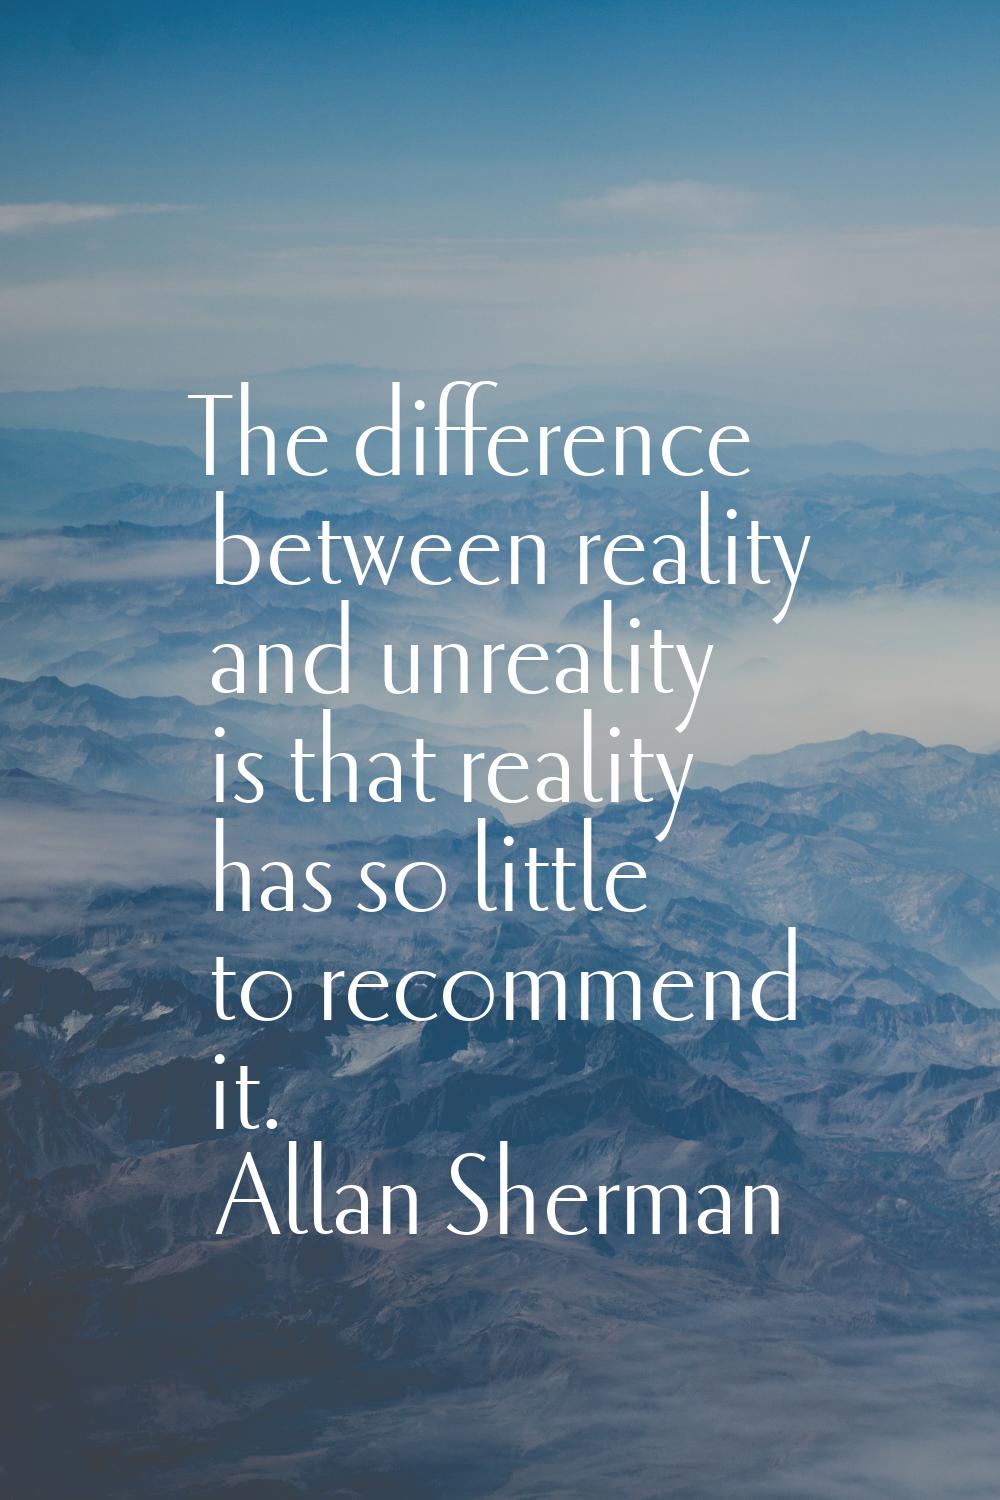 The difference between reality and unreality is that reality has so little to recommend it.